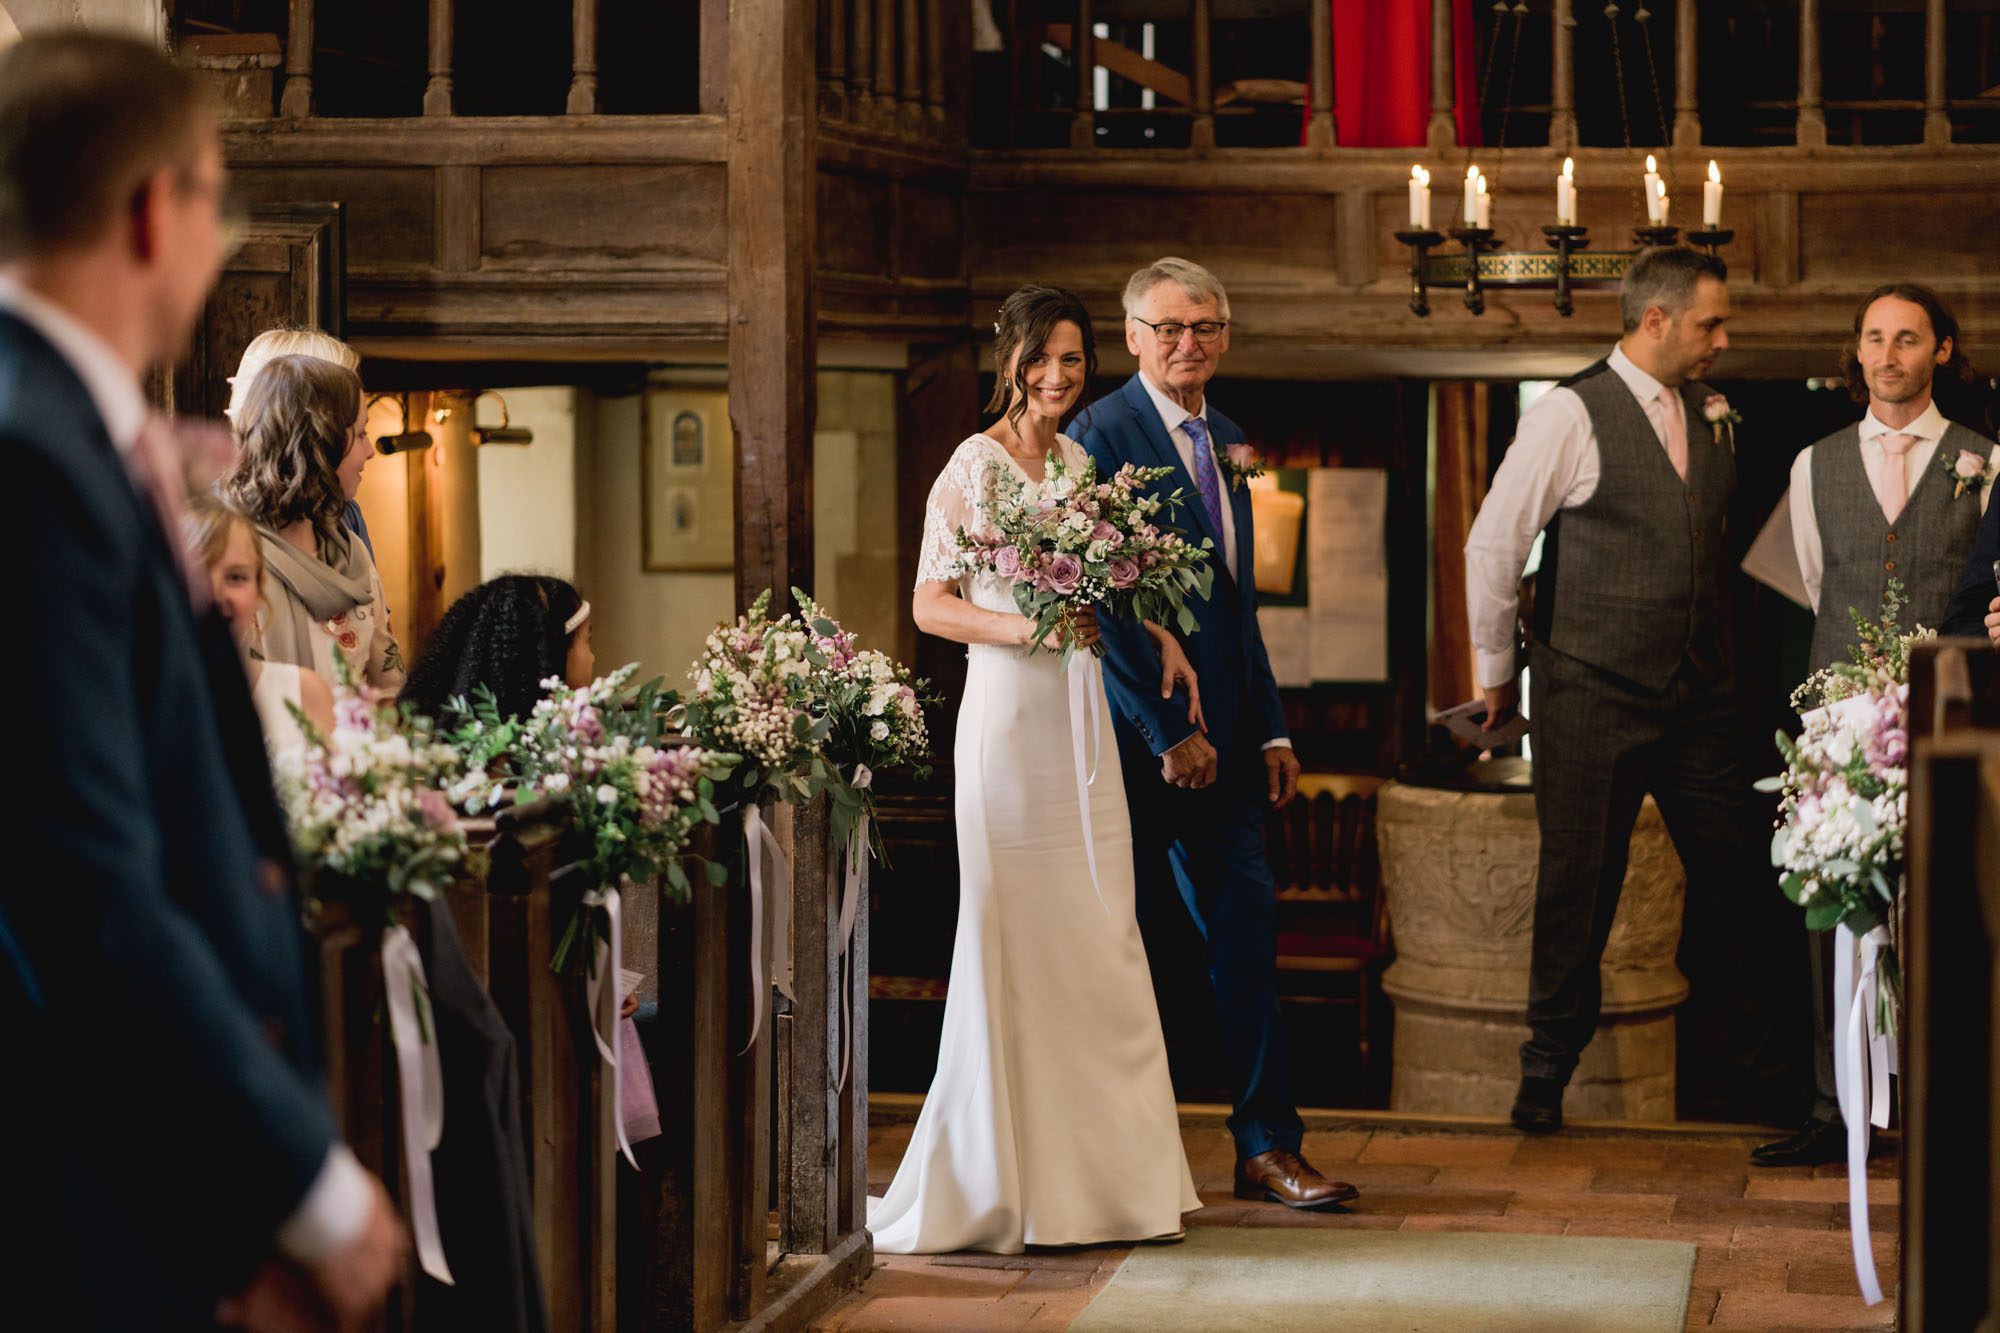 A bride walking down the aisle with her father at Dorney Court in Buckinghamshire.